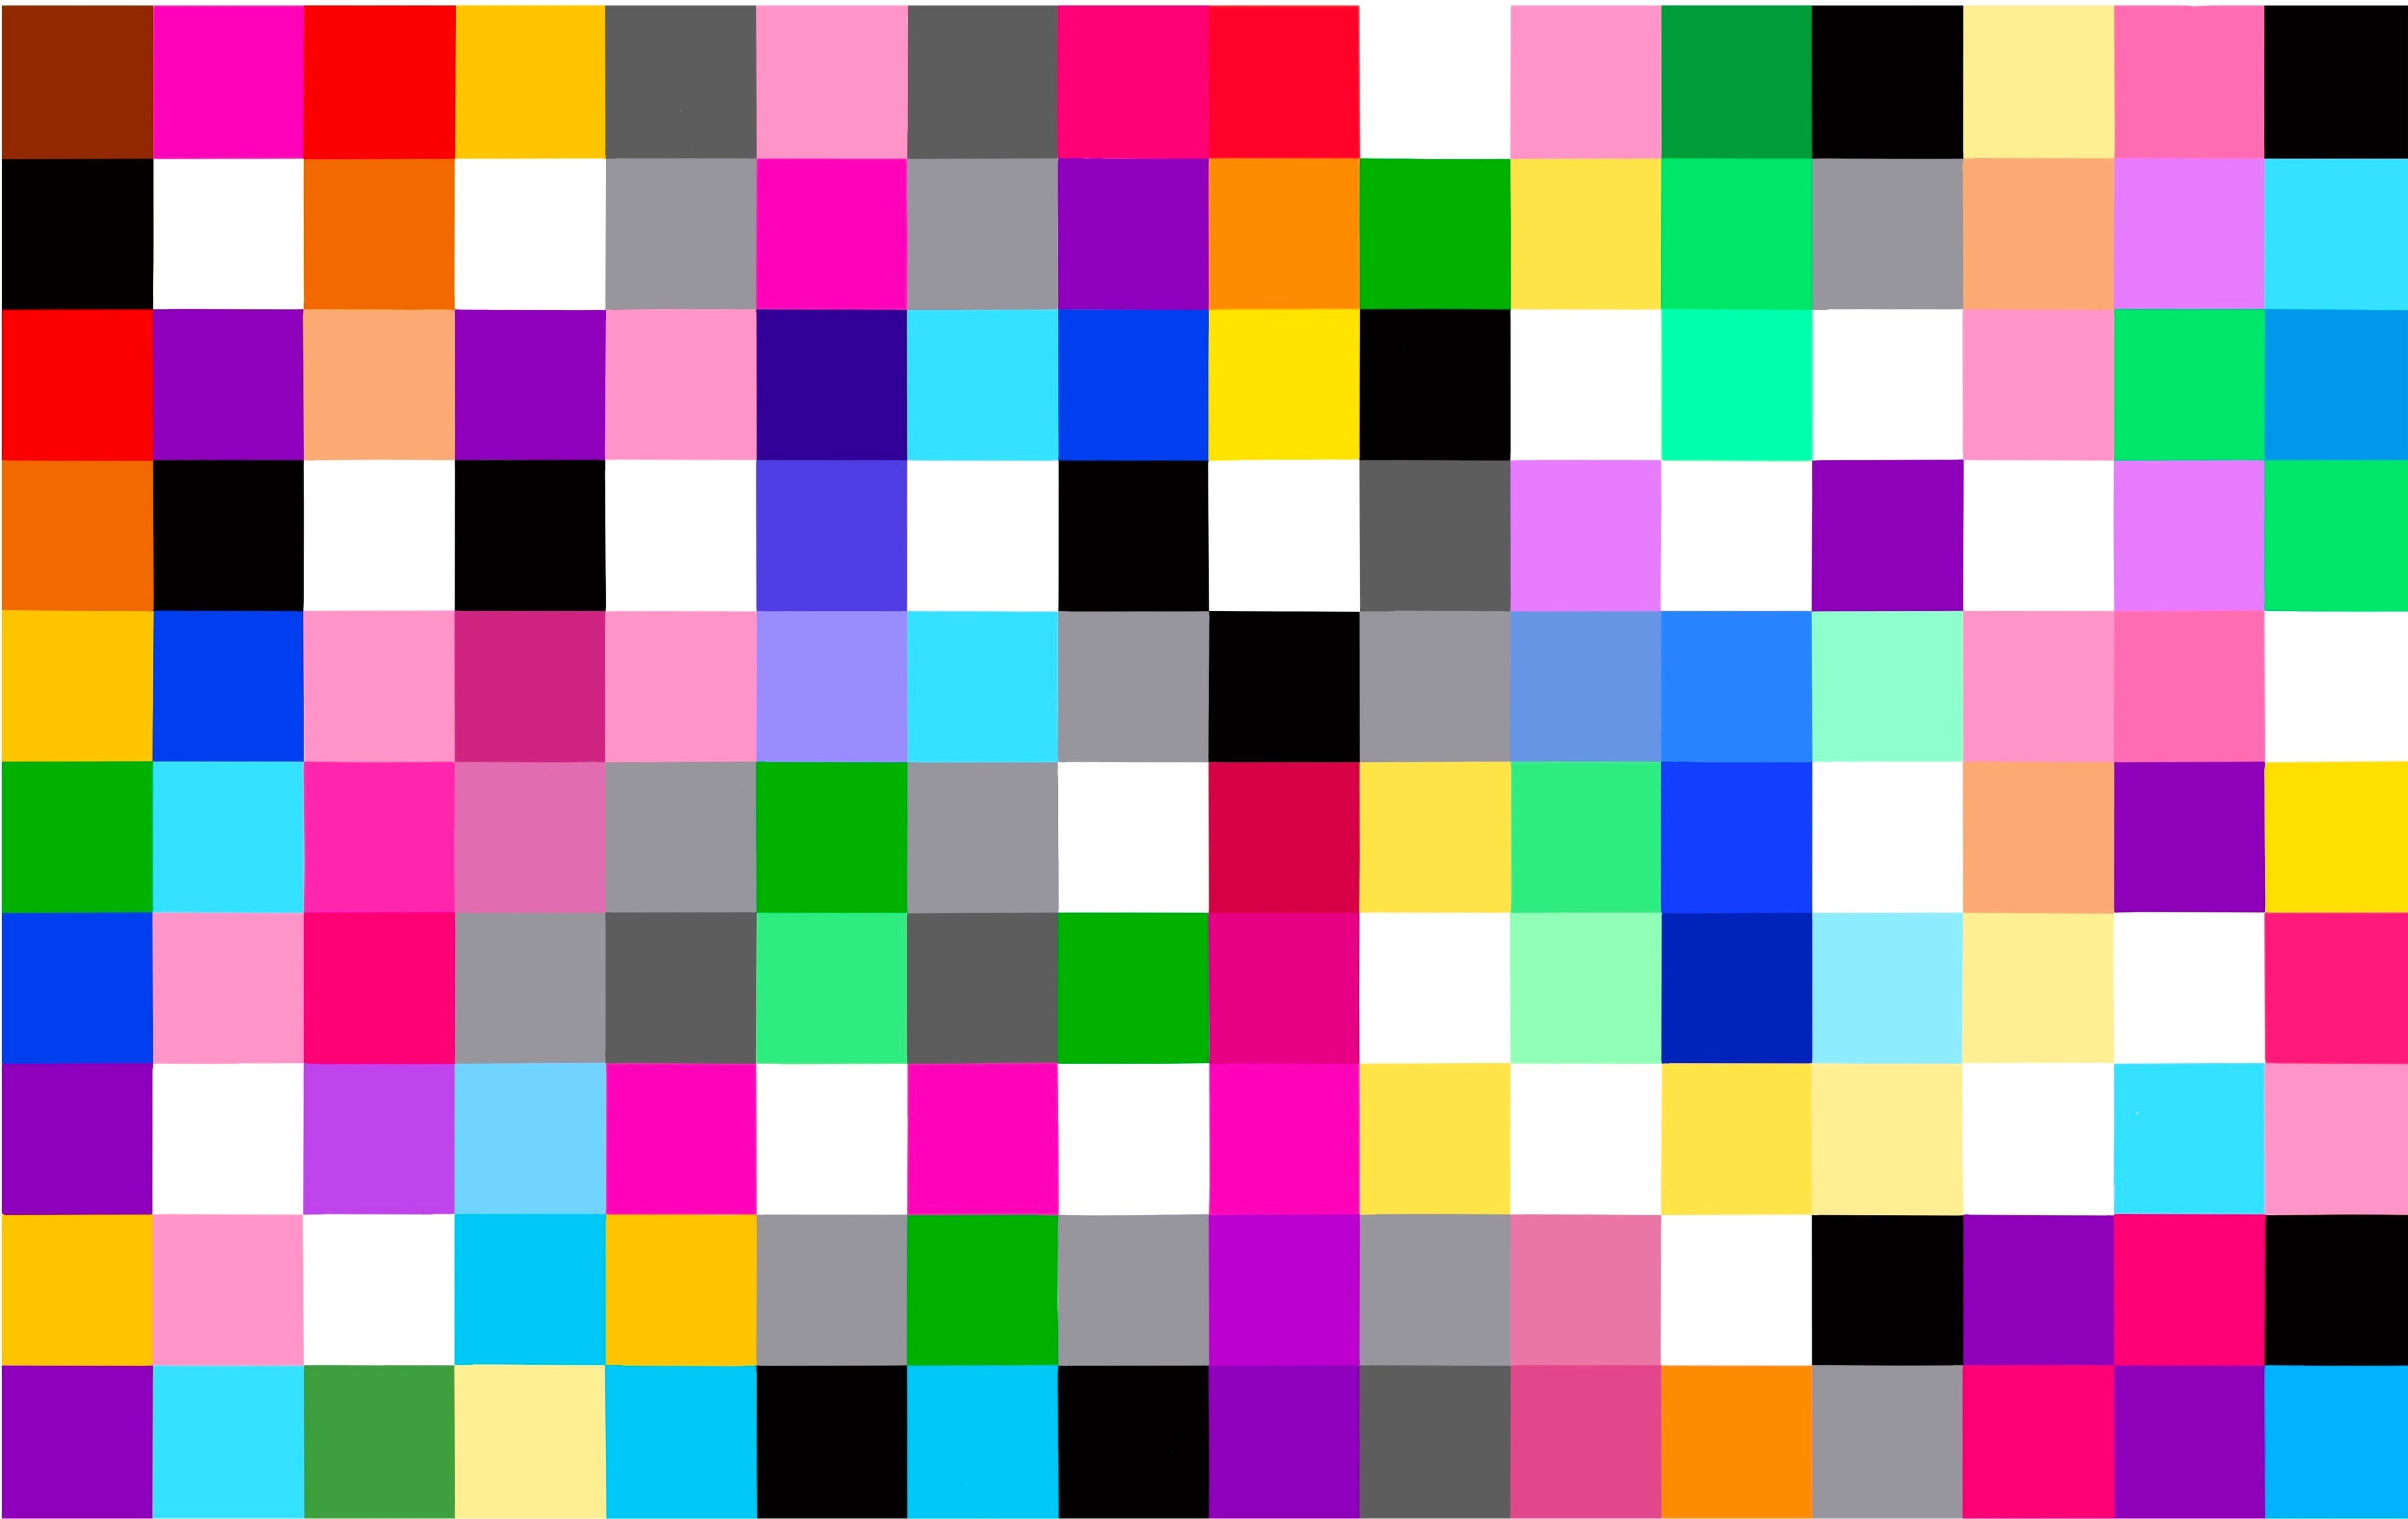 A mosaic of colourd squared made up of various pride flag colours